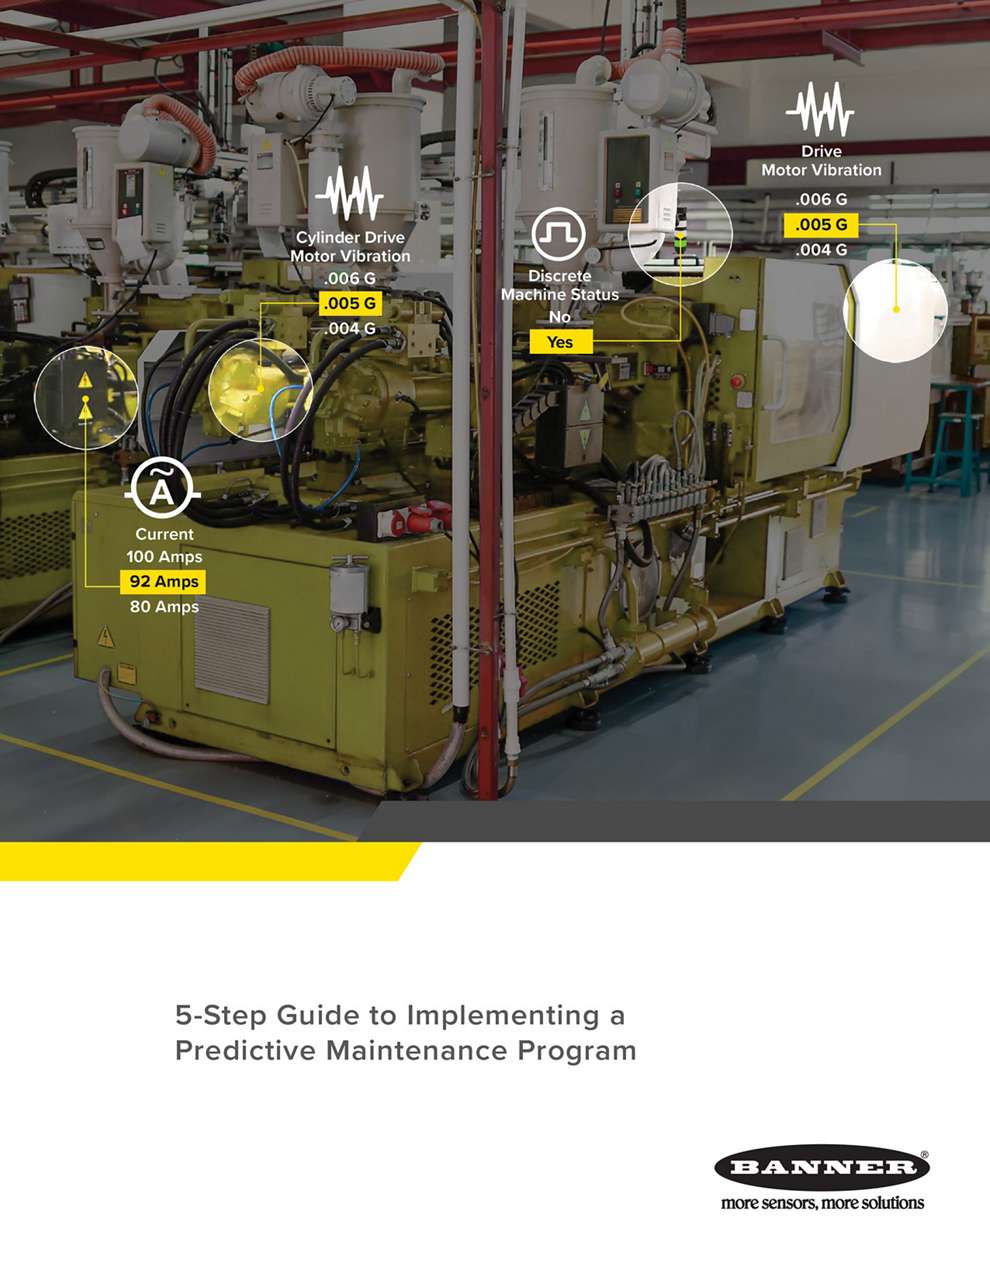 5-Step Guide for Predictive Maintenance